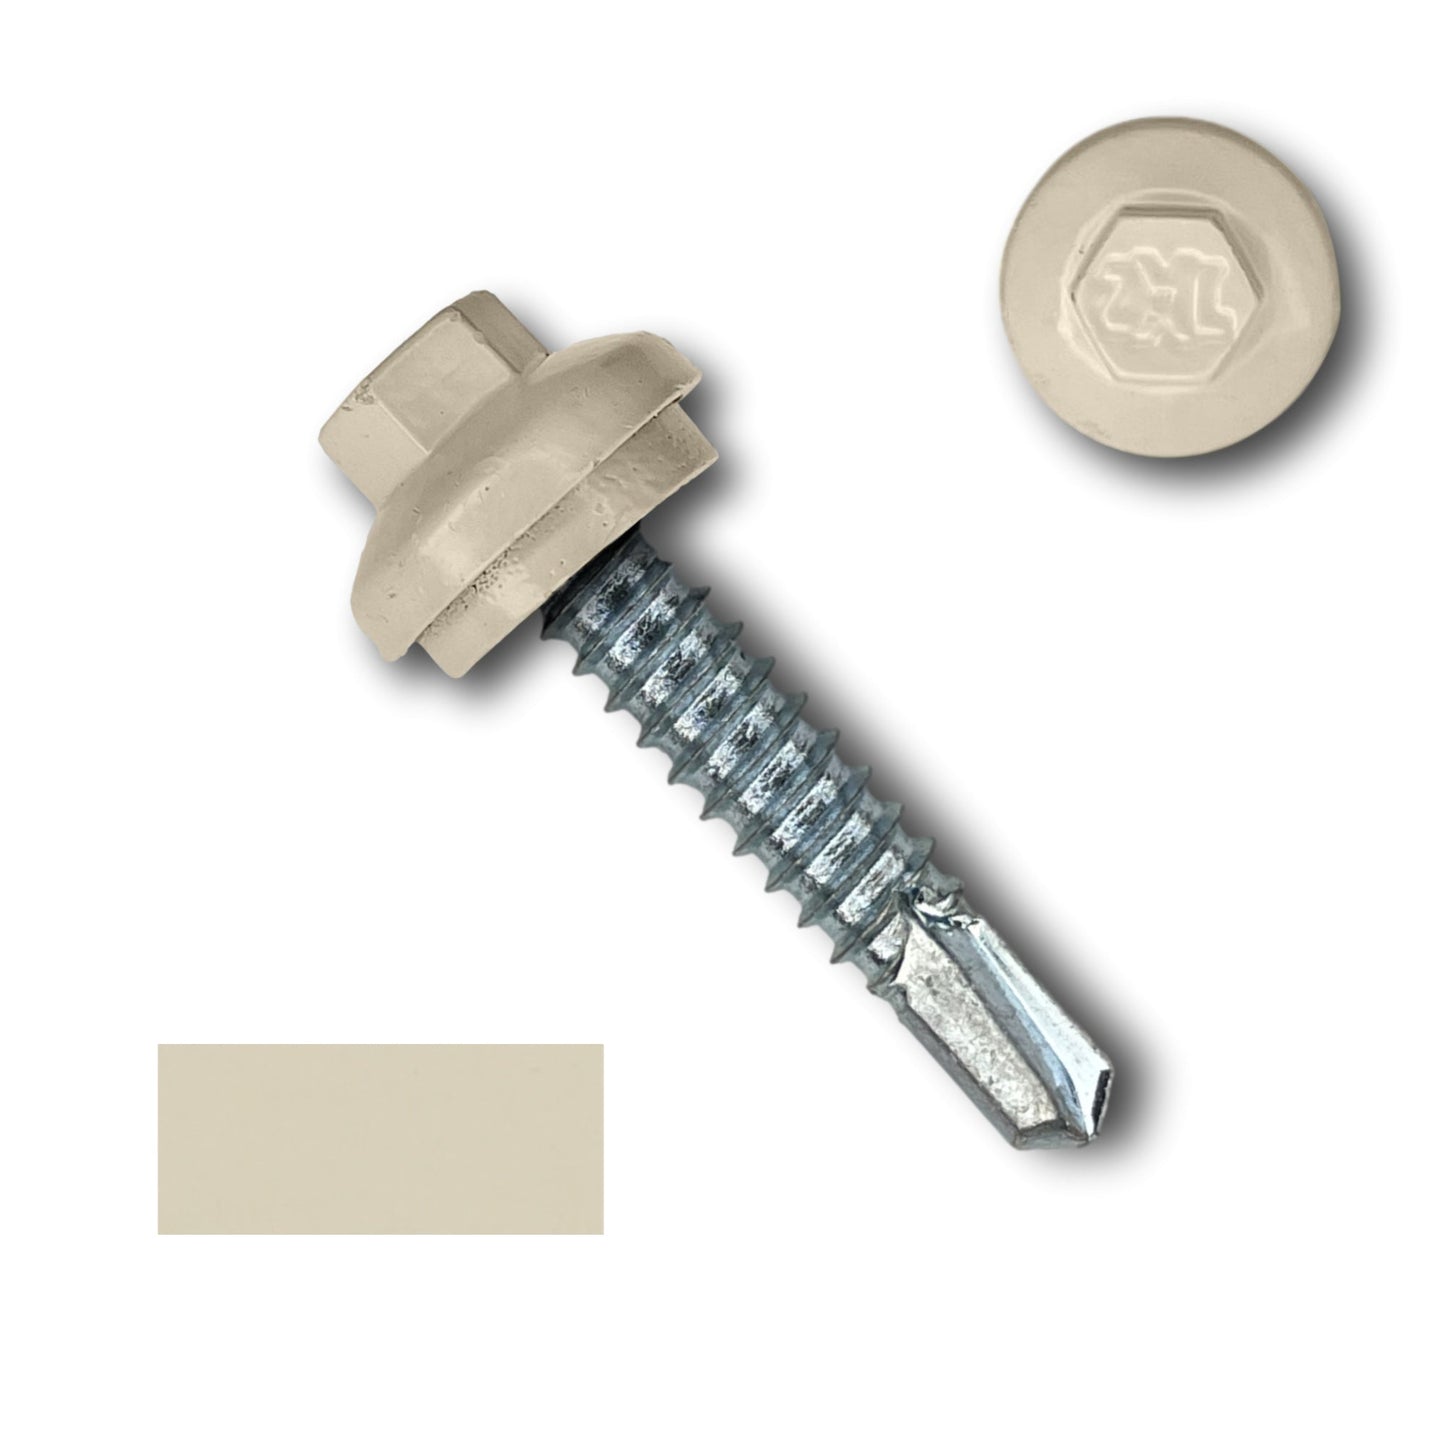 A close-up image of a #14 x 1.25" ZXL Dome Cap Metal Building Screws (Metal-to-Metal), Self-Drilling - 250, 500, or 1000 Pack with a beige-colored head and washer attached. A separate ZXL Dome Cap from Perma Cover and a color swatch matching the head of the screw are also shown. The self-drilling screw has a pointed end and metallic threading.